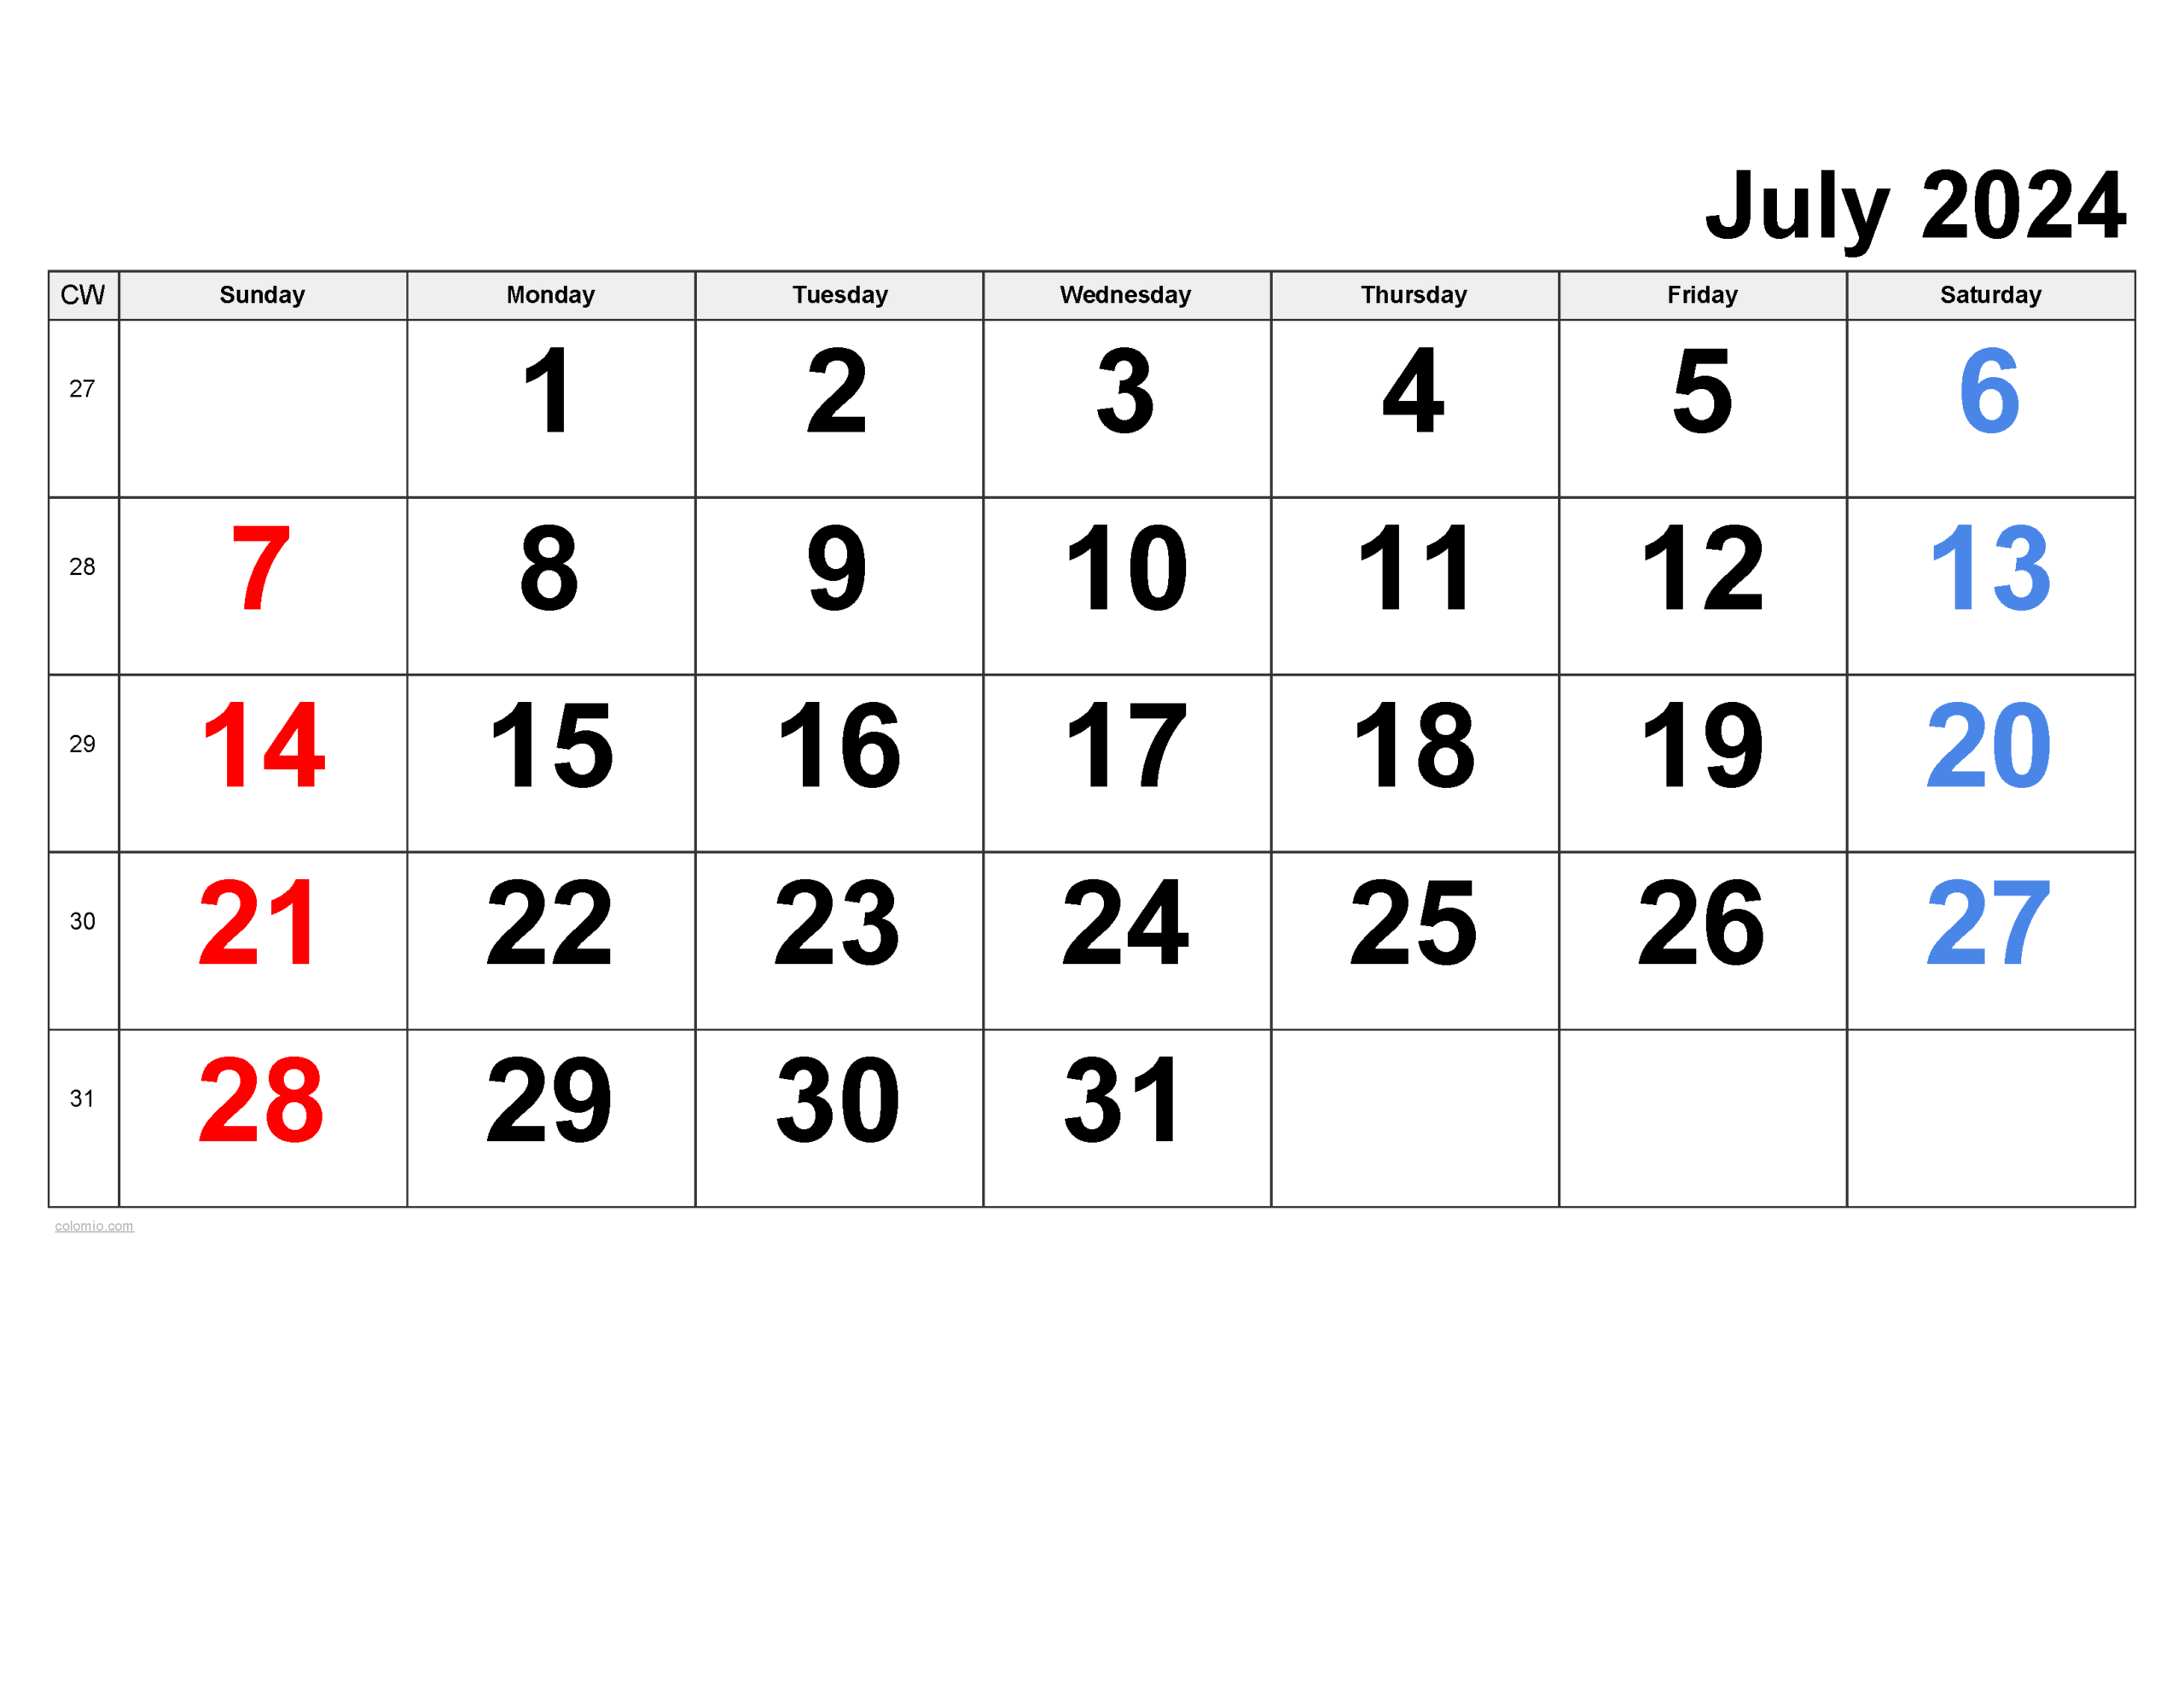 July 2024 Calendar | Free Printable Pdf, Xls And Png intended for Weekly July 2024 Calendar